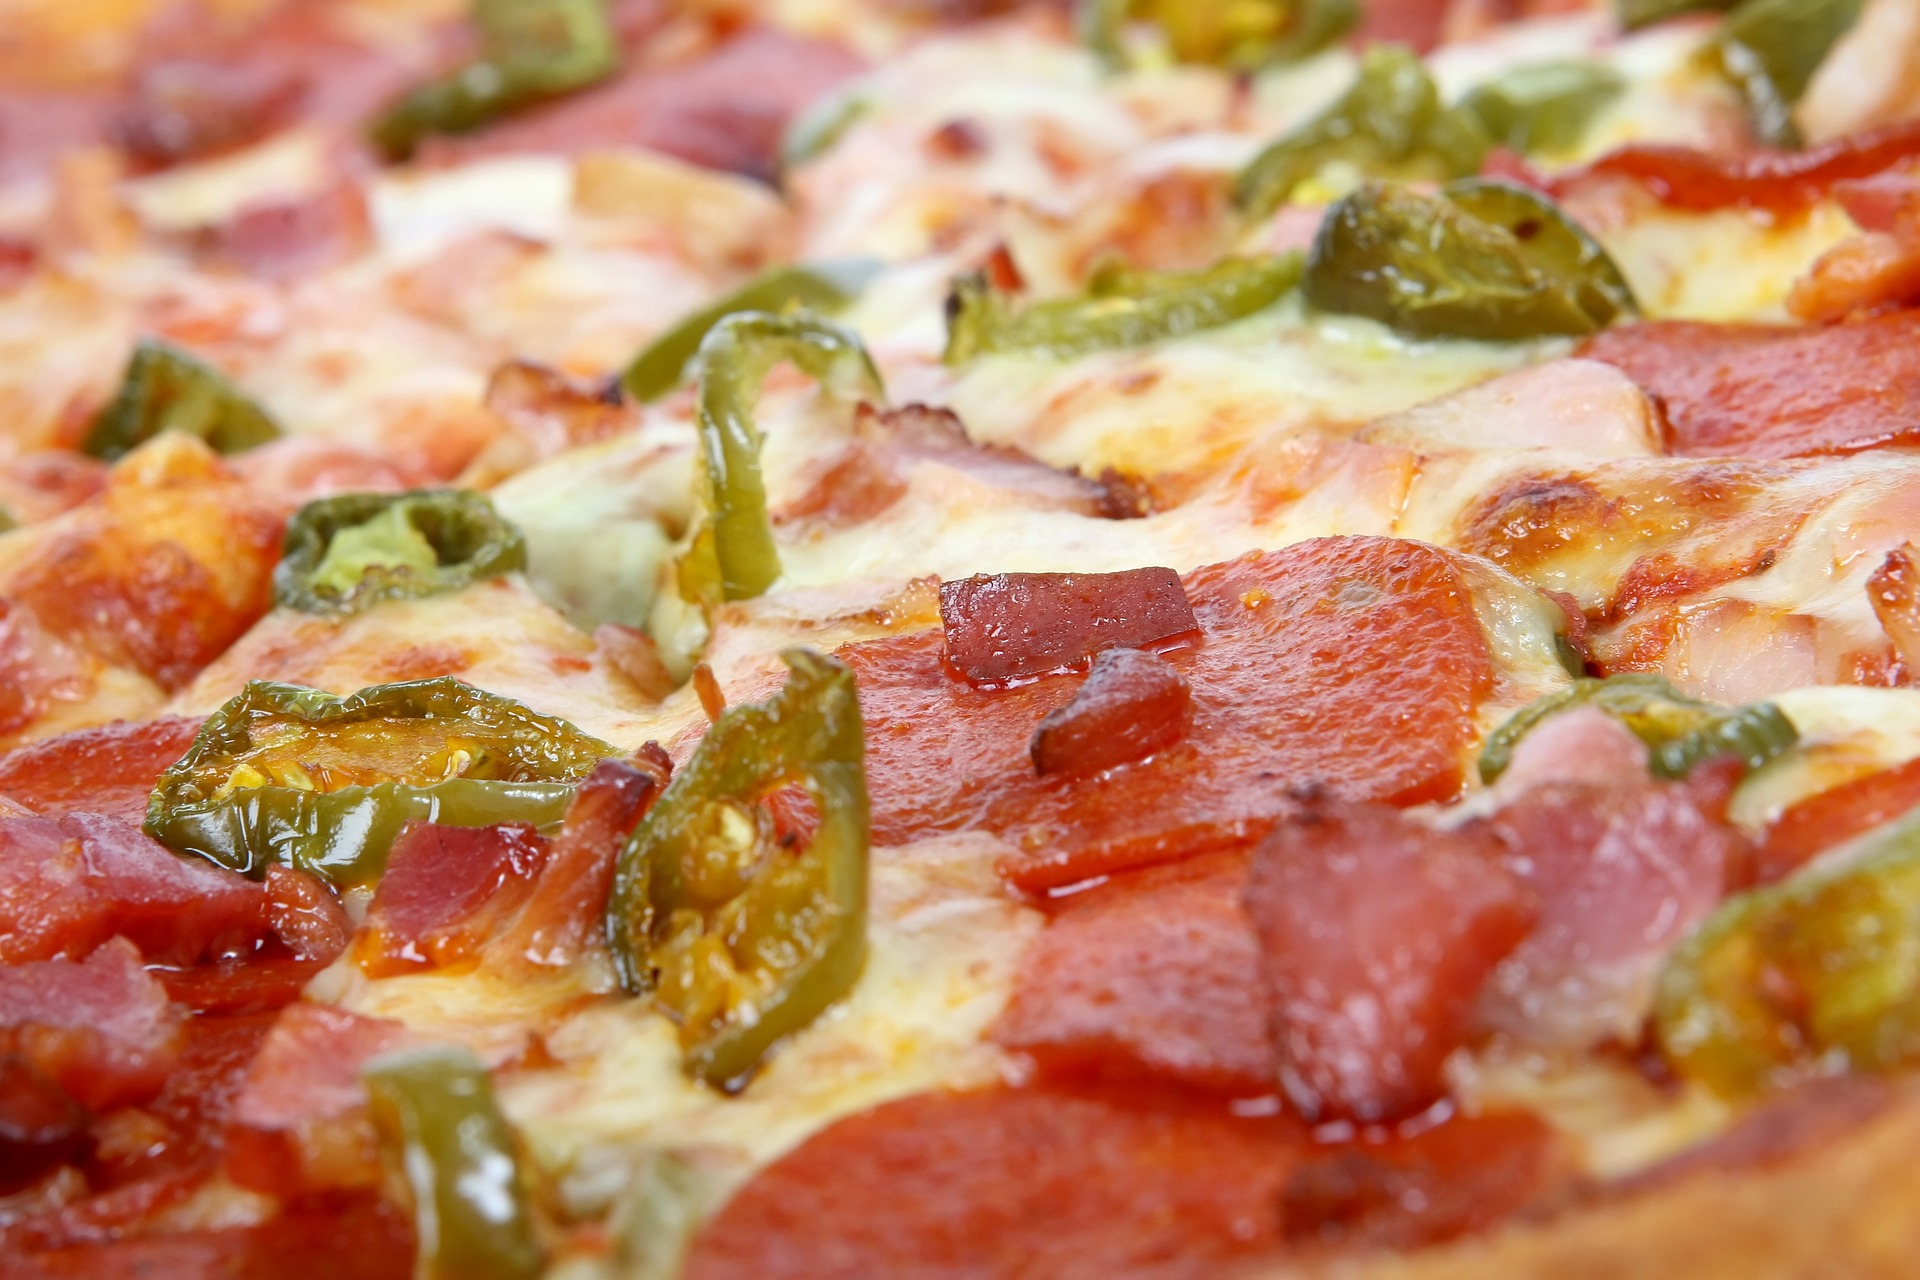 Bacon and Jalapeno toppings